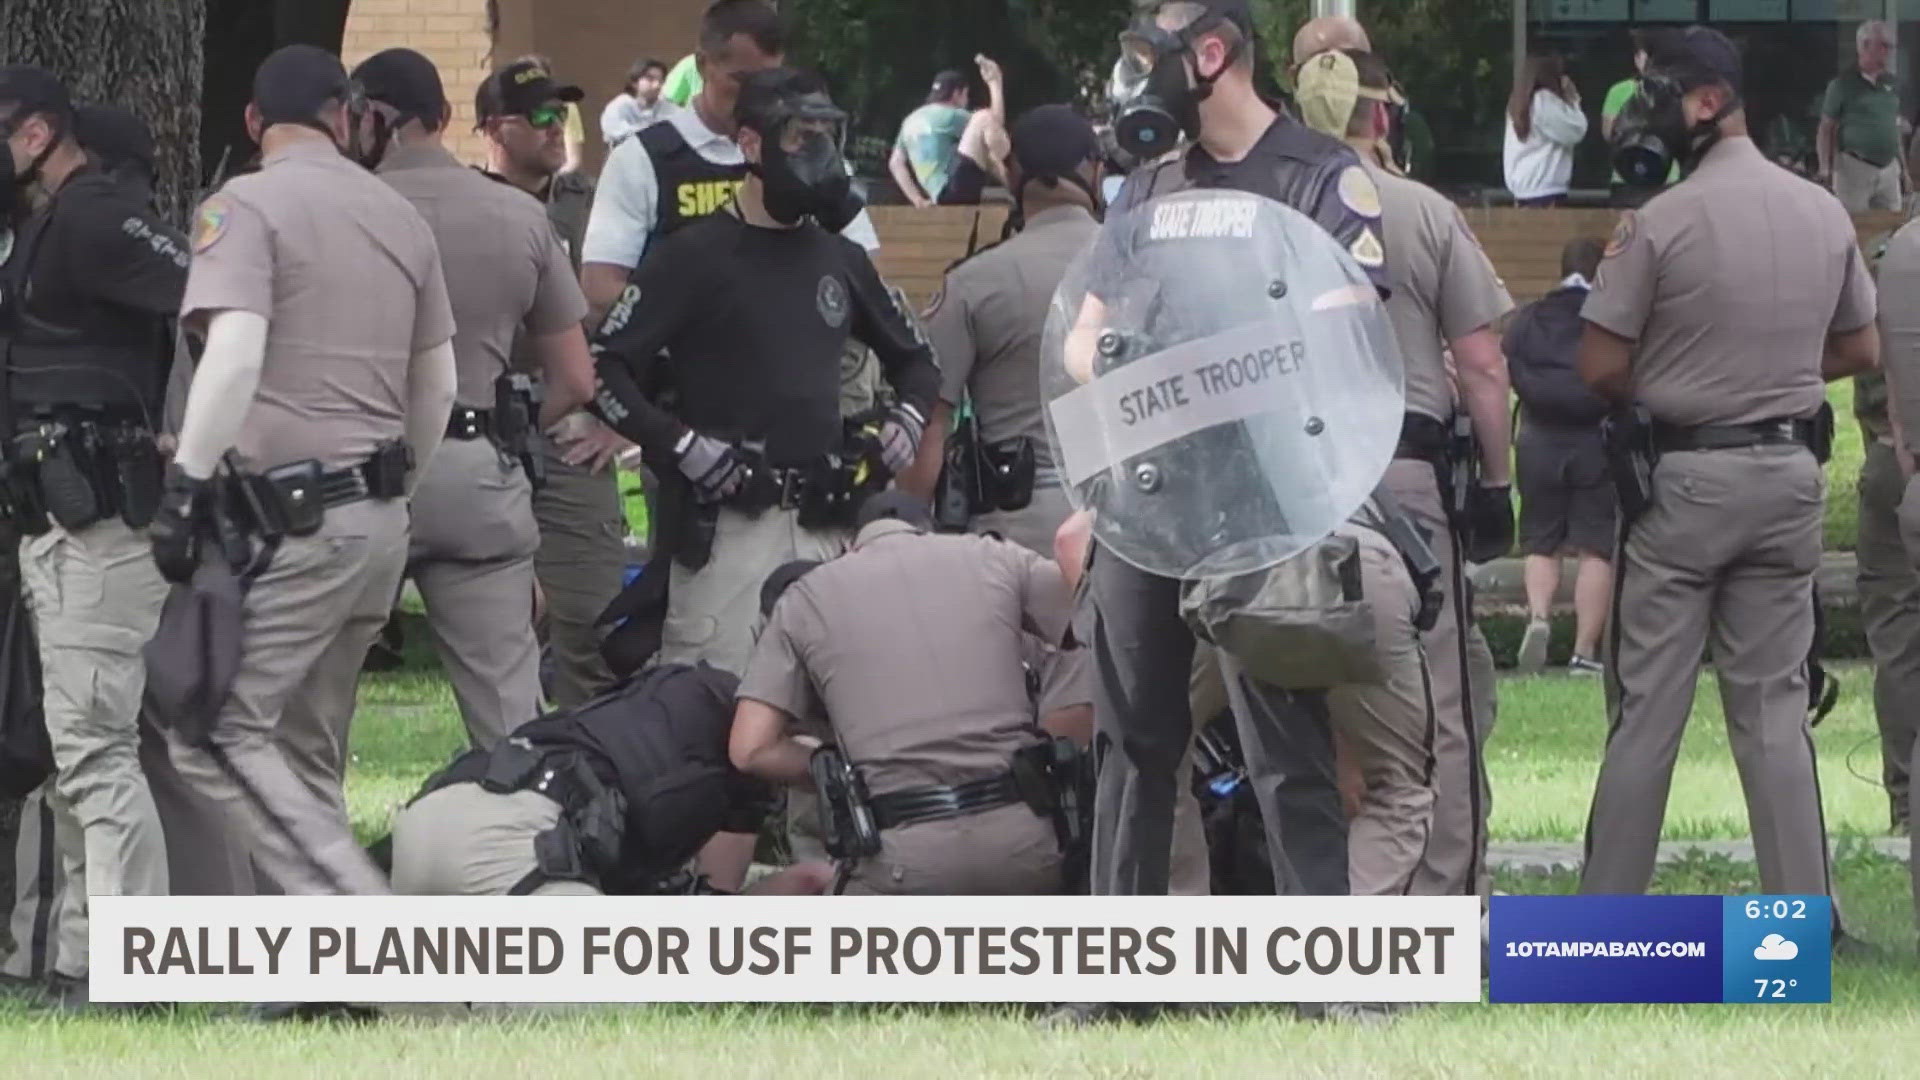 The rally calls for charges to be dropped for those arrested during a pro-Palestine protest at the University of South Florida.